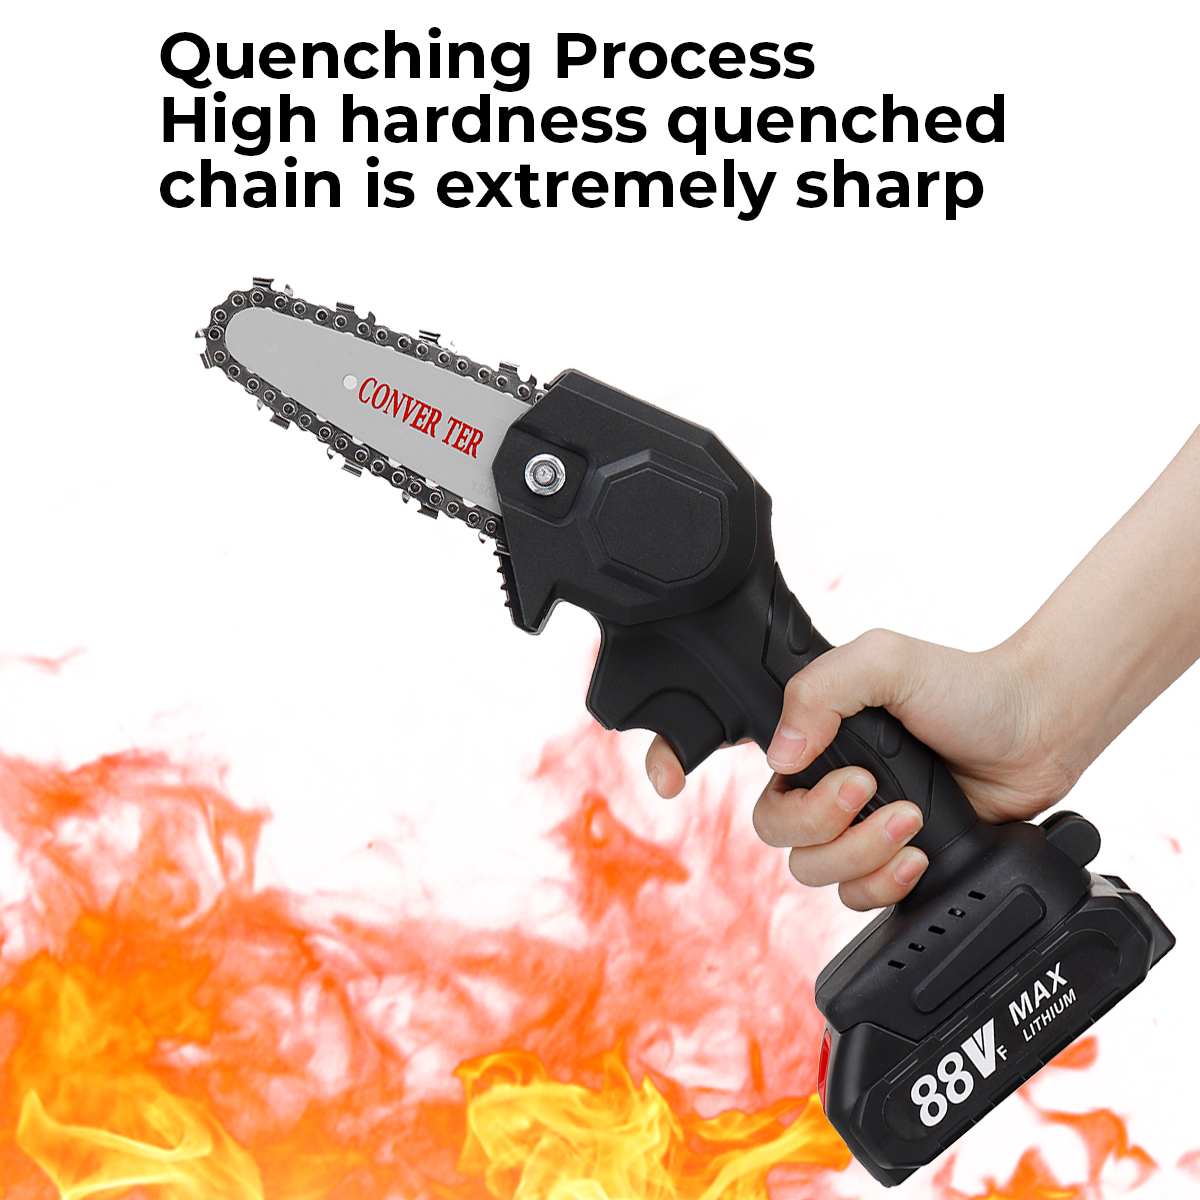 4-Inch-7500mAh-Mini-Electric-Chain-Saw-Pruning-Chainsaw-Cordless-Garden-Tree-Logging-Trimming-Saw-Fo-1798984-5